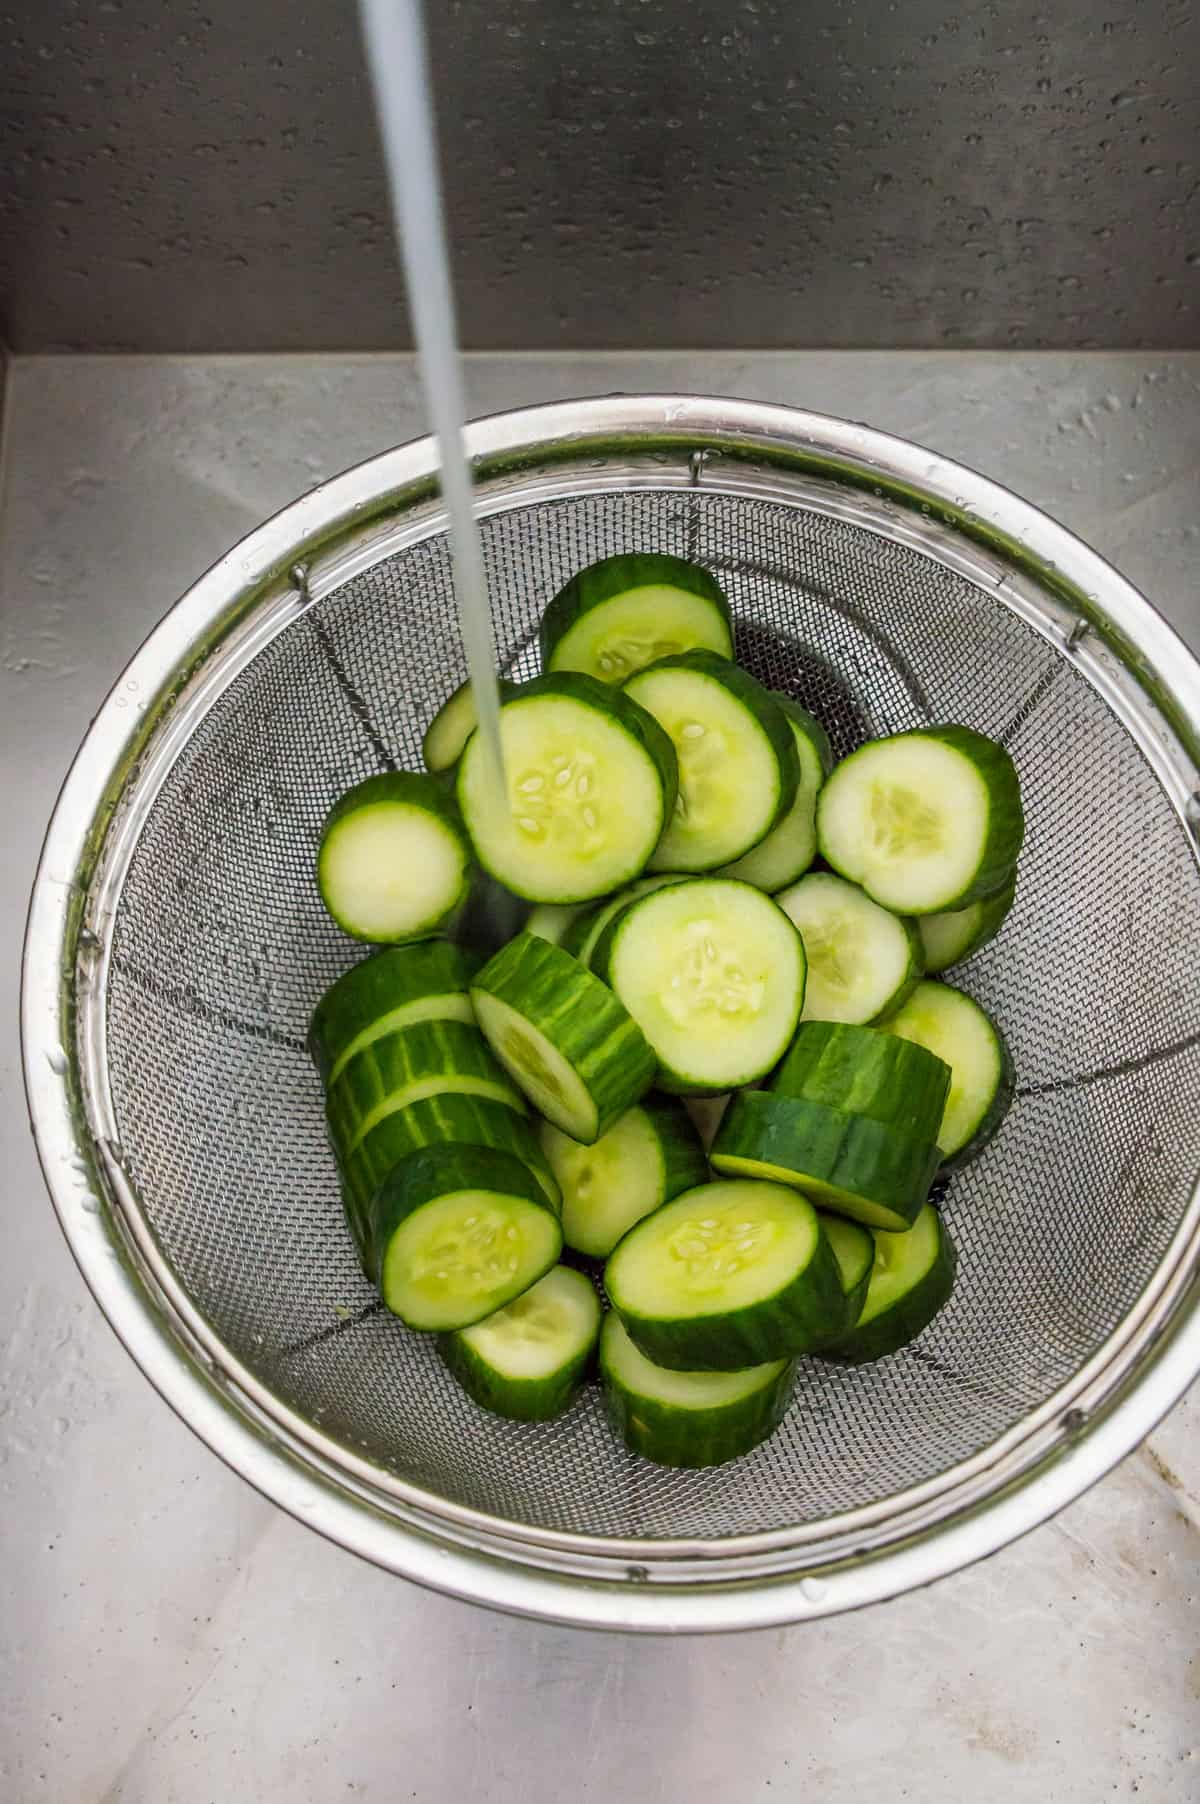 Sliced cucumbers in a colander with water being poured on them.